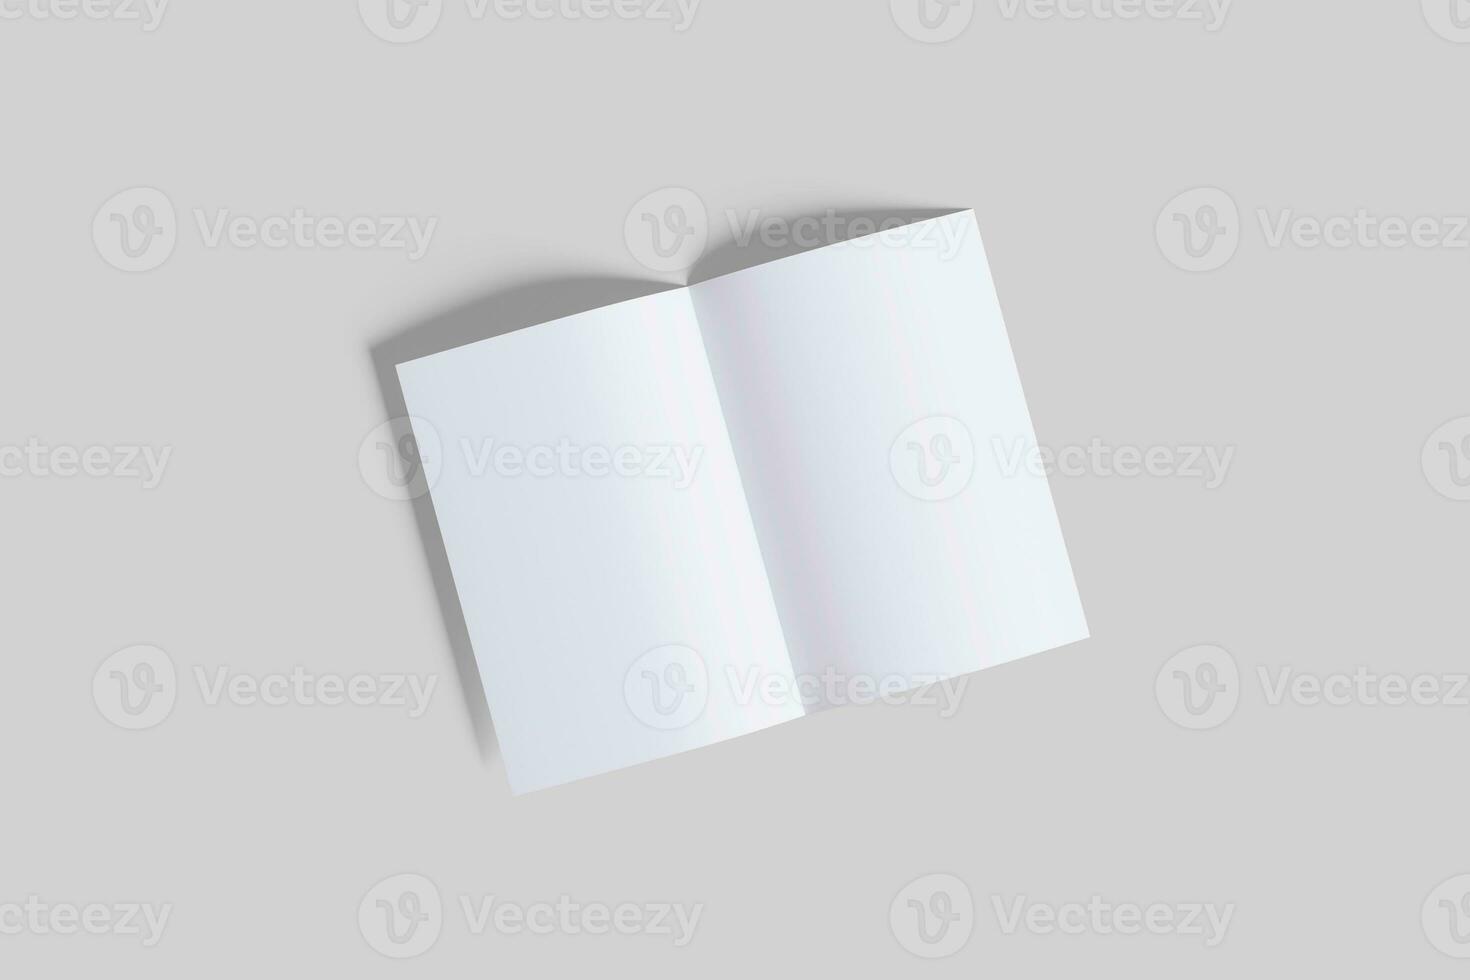 A5 business brochure white color and realistic textures photo